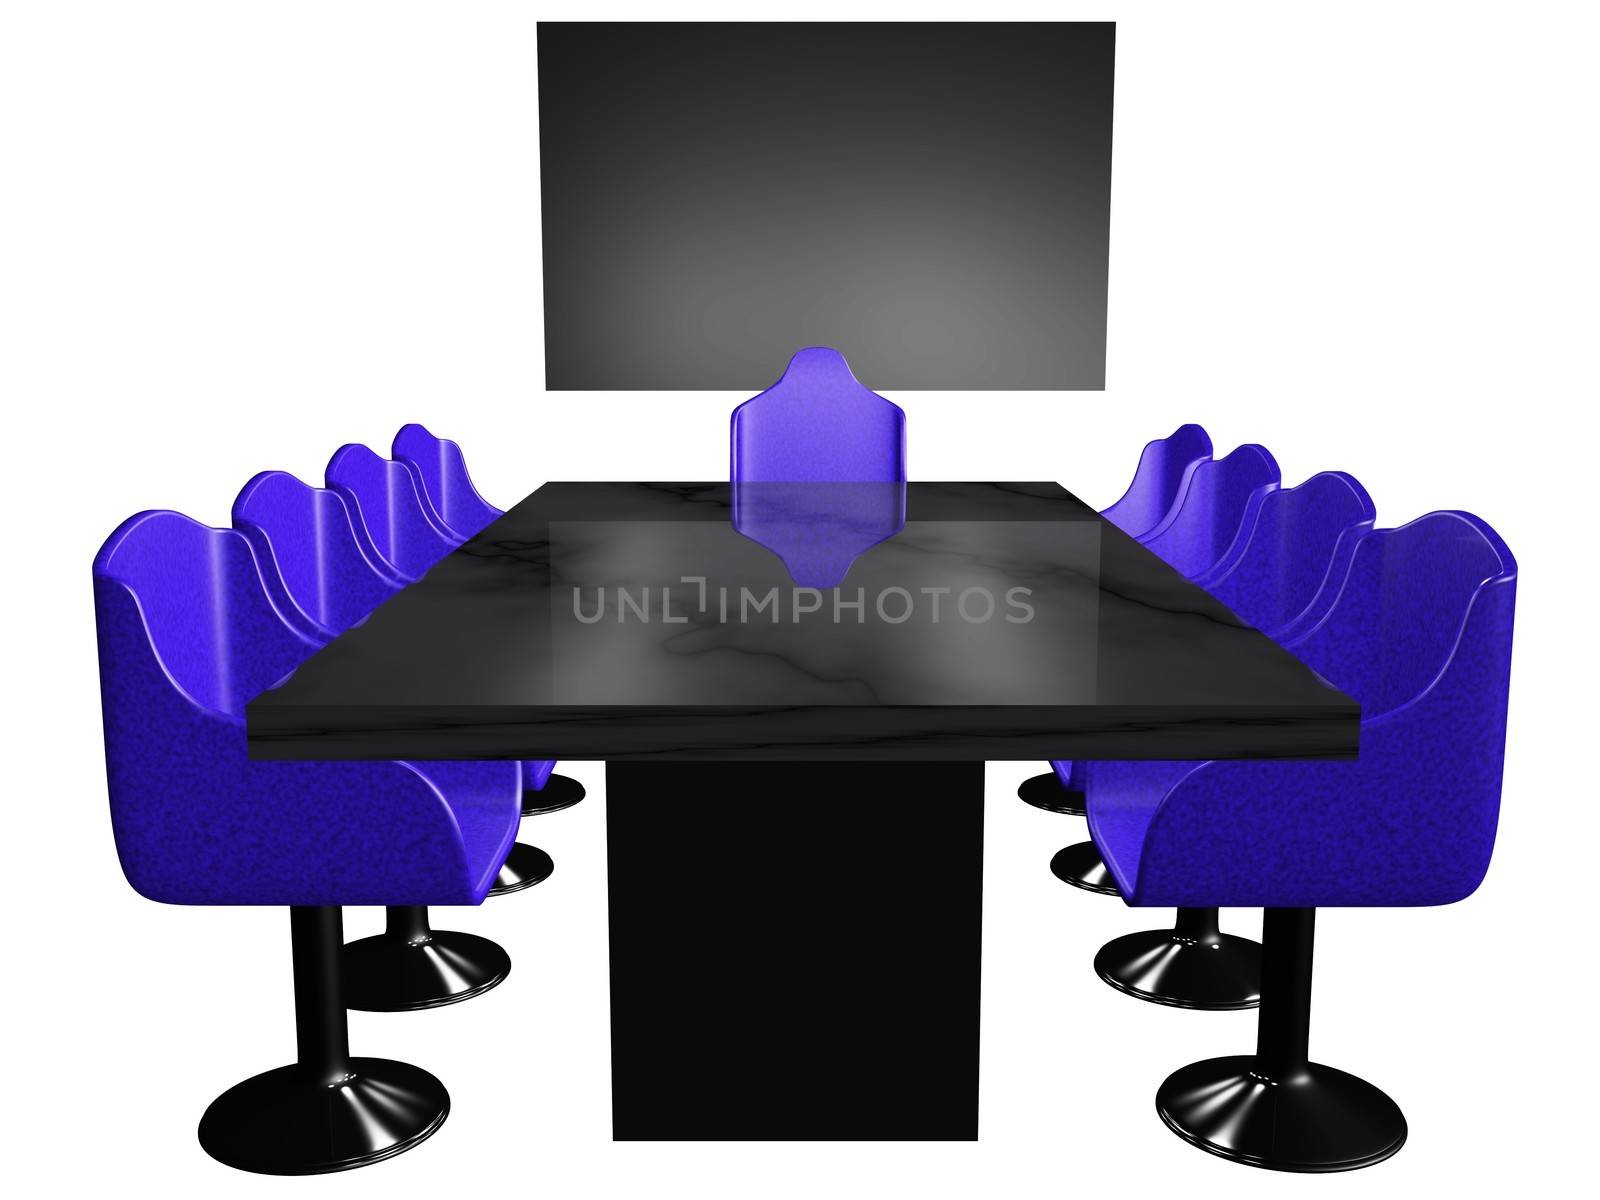 Conference Room Table by RichieThakur